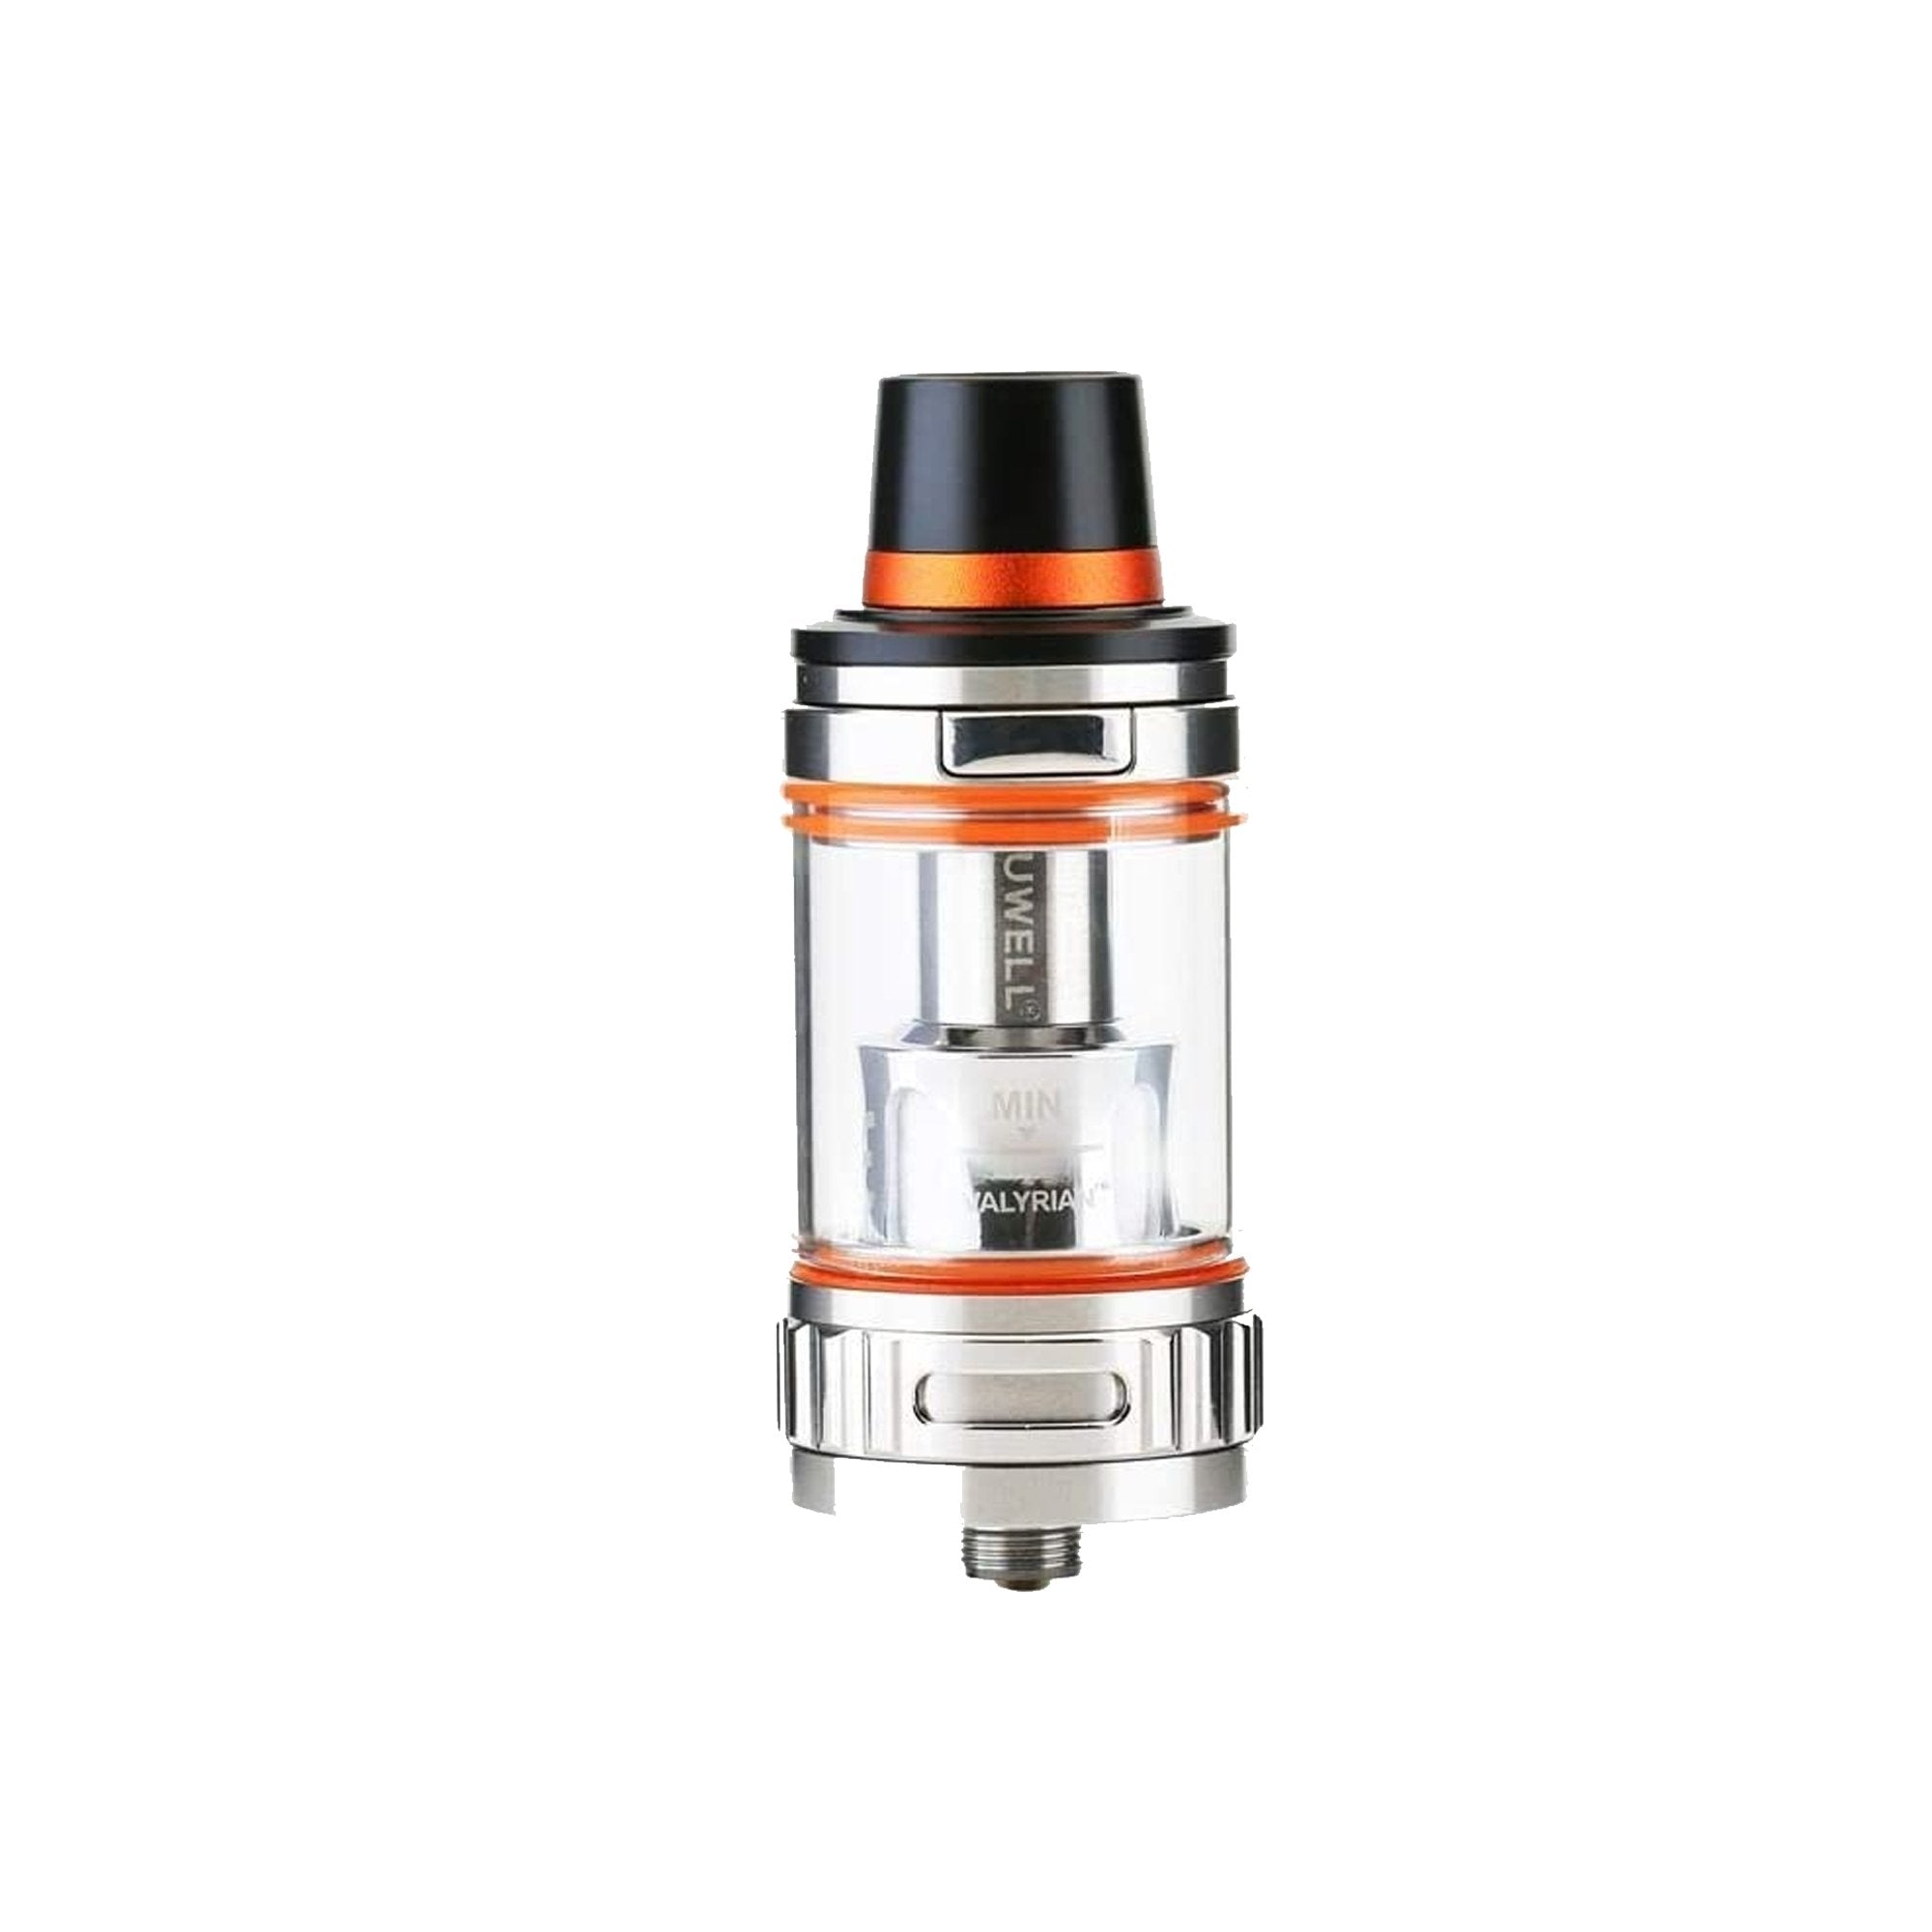 Uwell Valyrian Sub-Ohm Tank | Uwell Valyrian Sub Ohm Tank has a 2ml | wolfvapes - Wolfvapes.co.uk-Stainless Steel